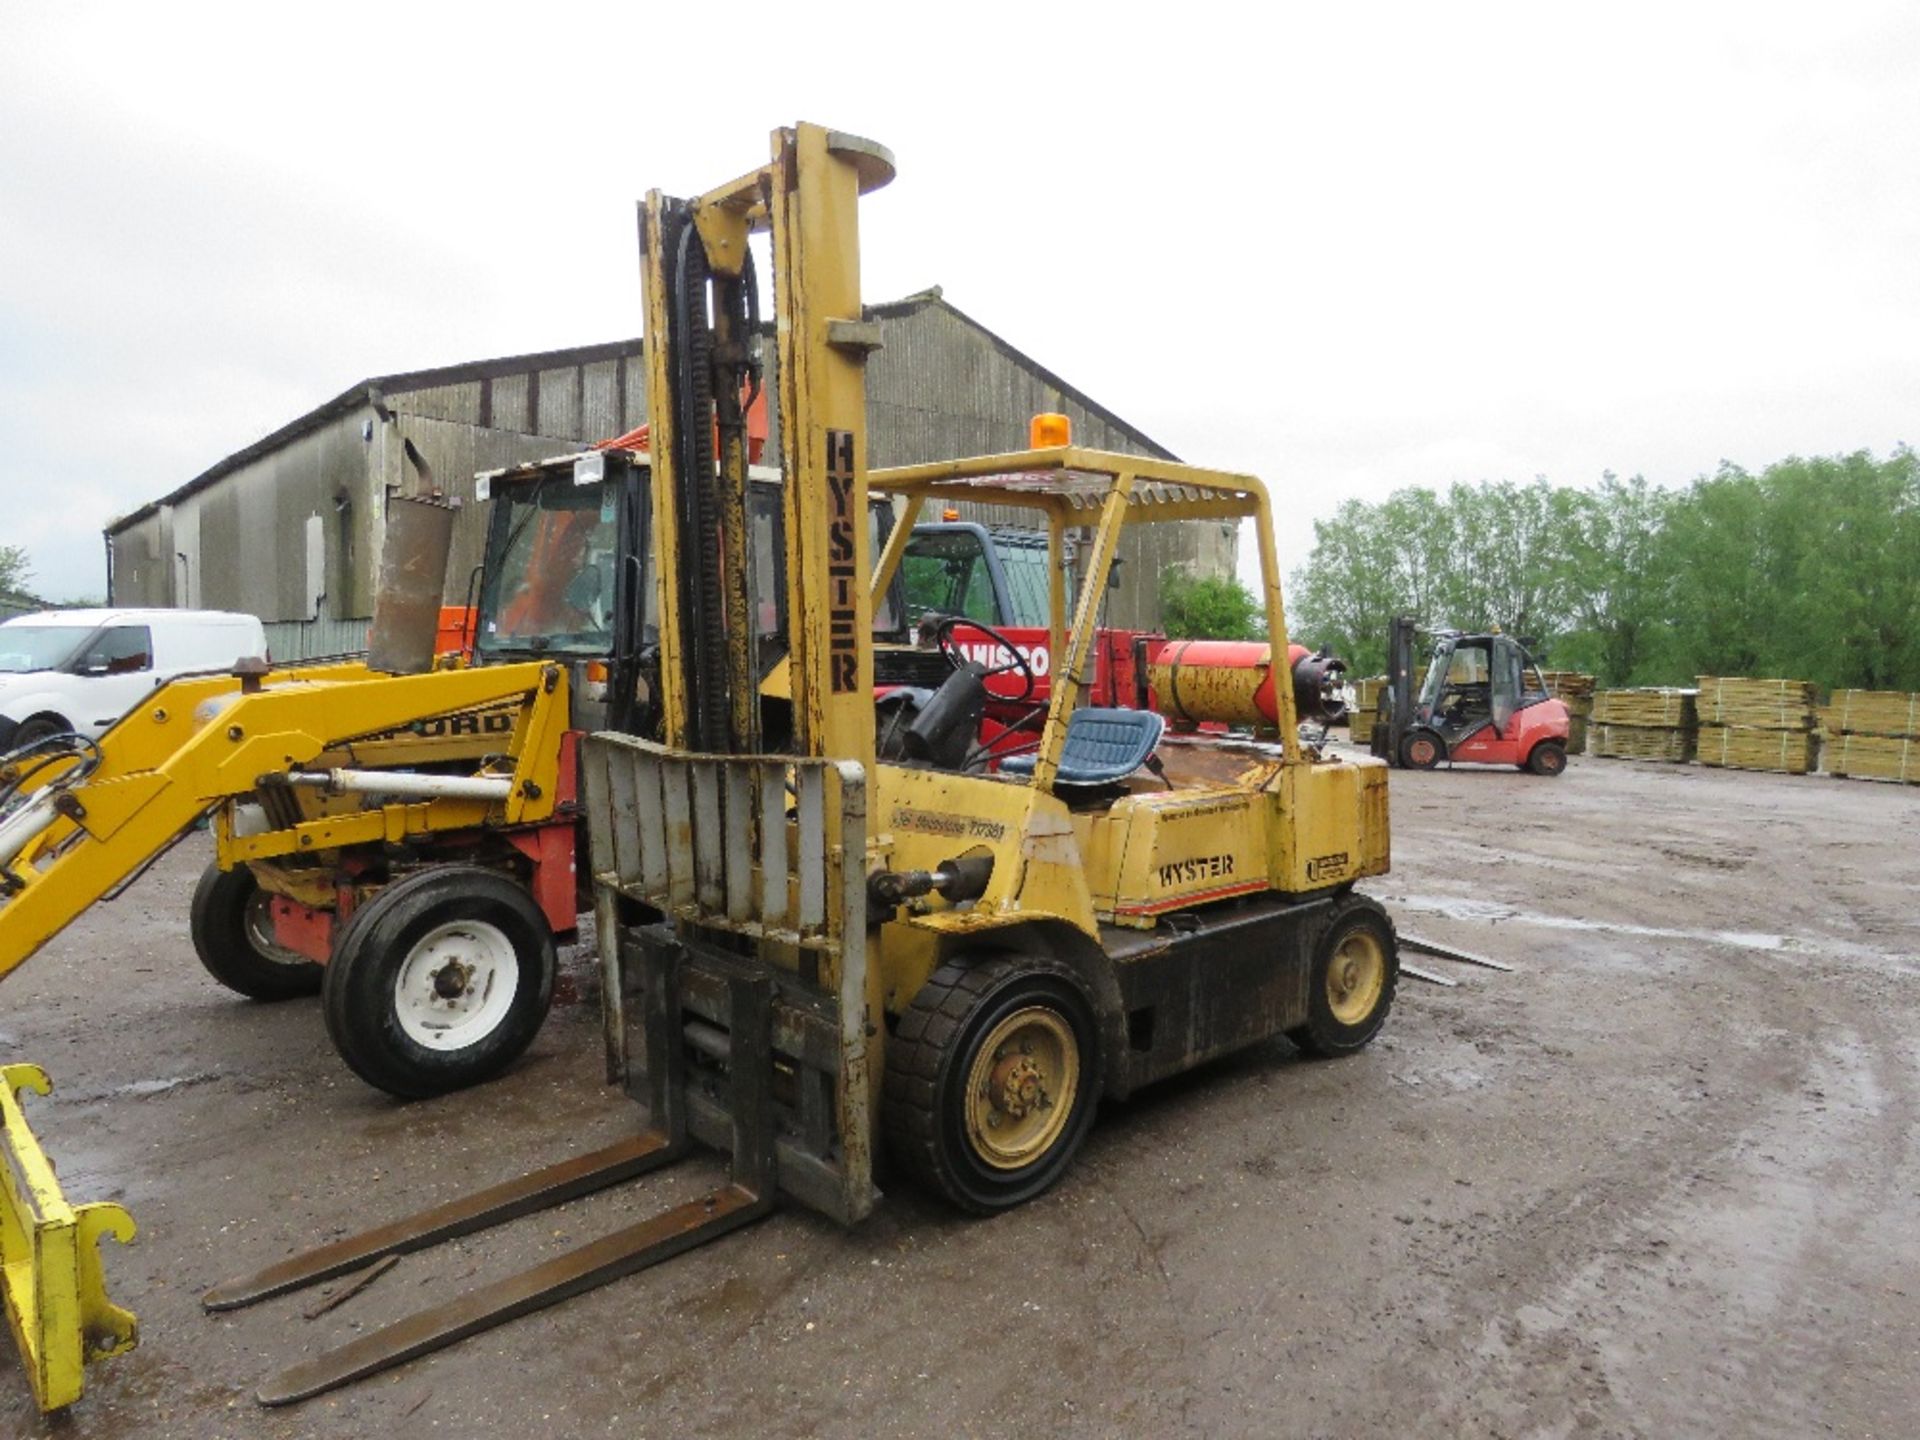 HYSTER GAS POWERED FORKLIFT TRUCK WITH SIDE SHIFT, 3.5 TONNE RATED LIFT CAPACITY. WHEN TESTED WAS SE - Image 2 of 11